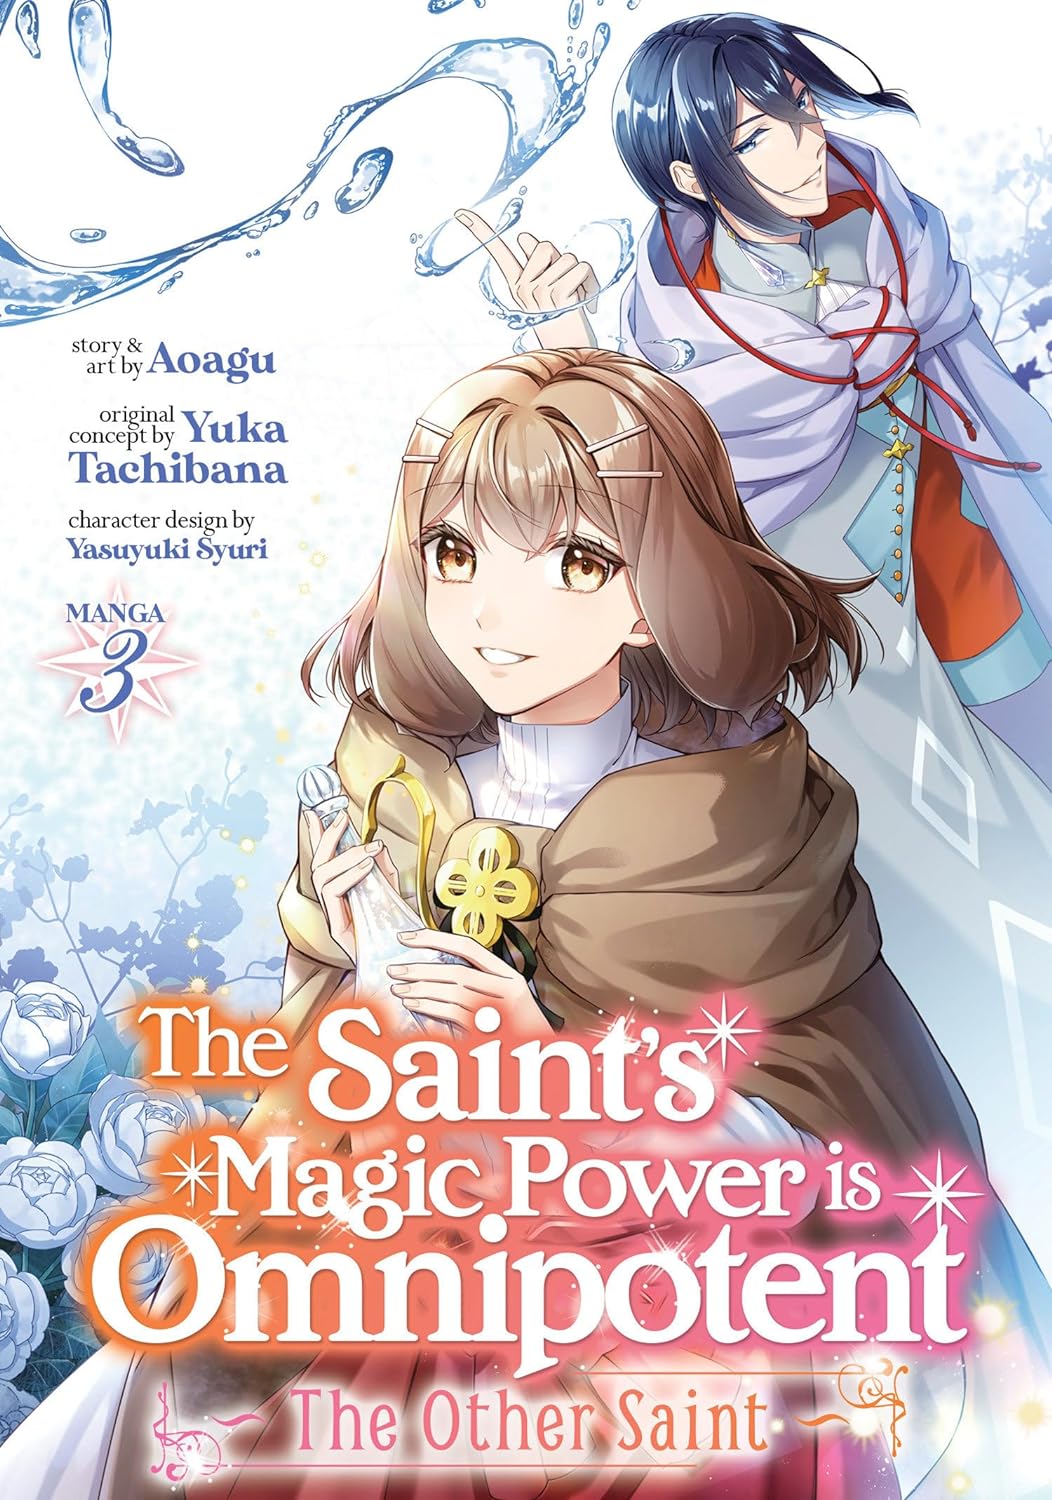 The Saint's Magic Power Is Omnipotent: The Other Saint (Manga) Vol. 03